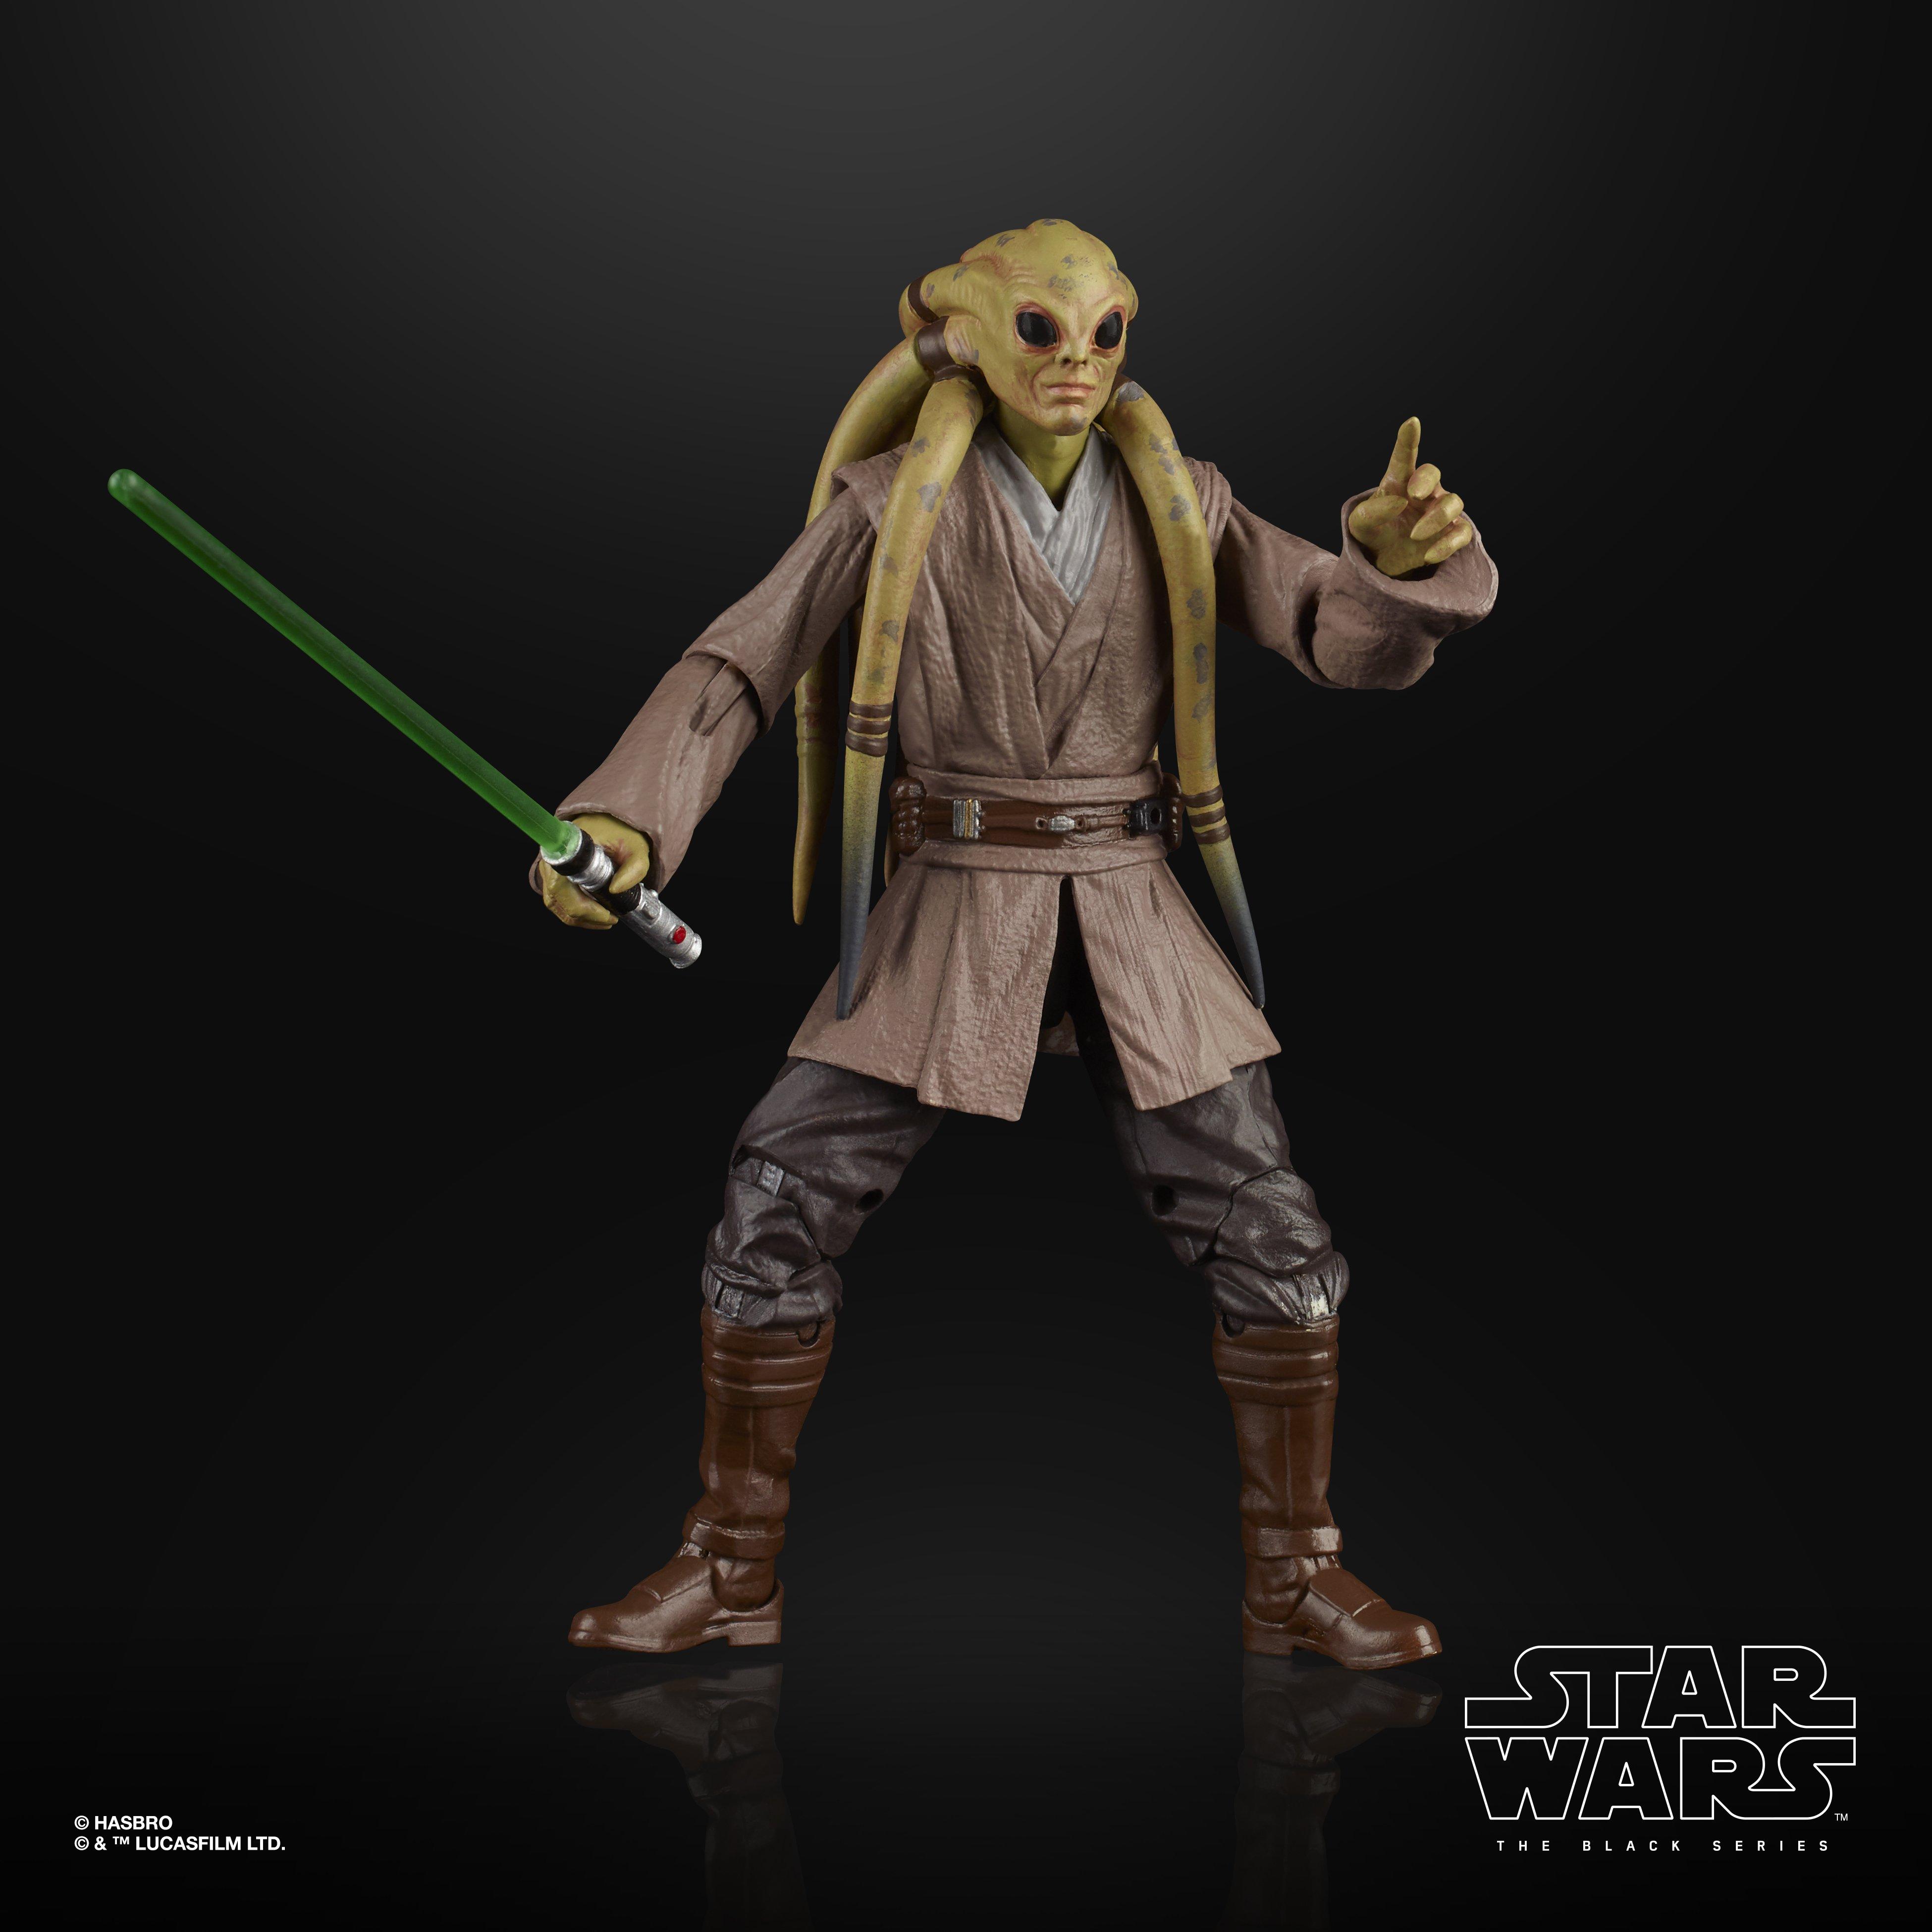 Hasbro Star Wars: The Black Series Episode II: Attack of the Clones Kit Fisto 6-in Action Figure